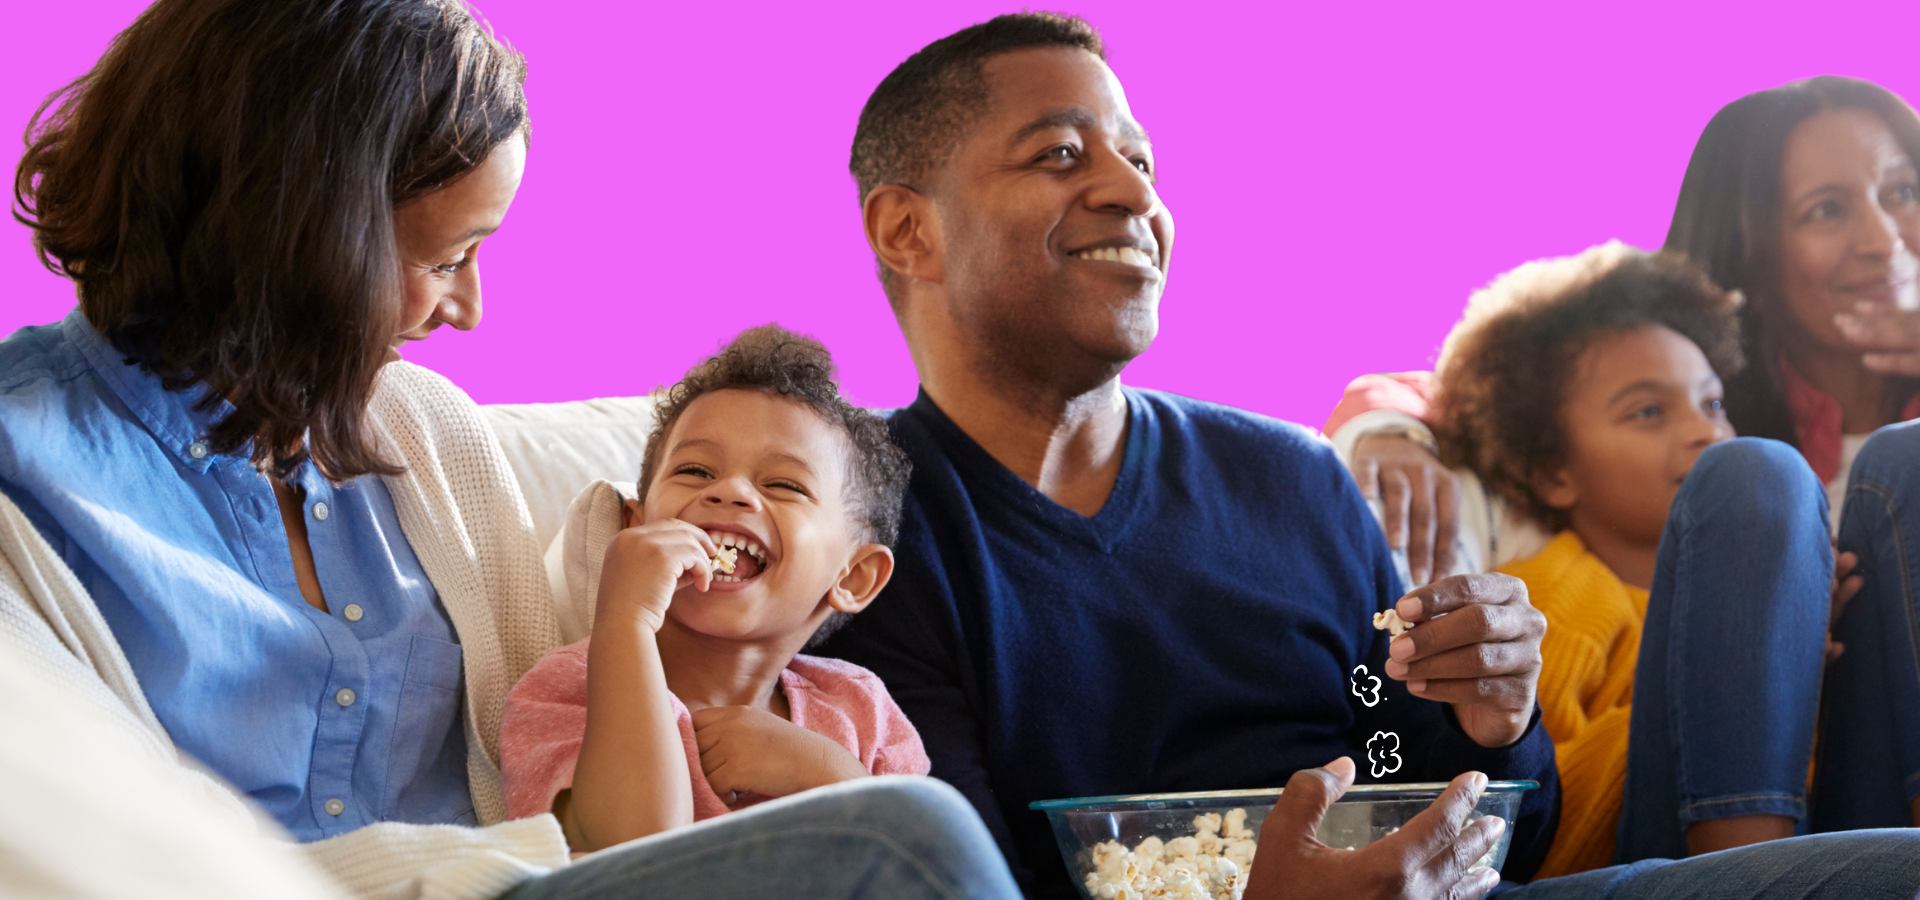 A family sitting on a couch, eating popcorn, and watching TV